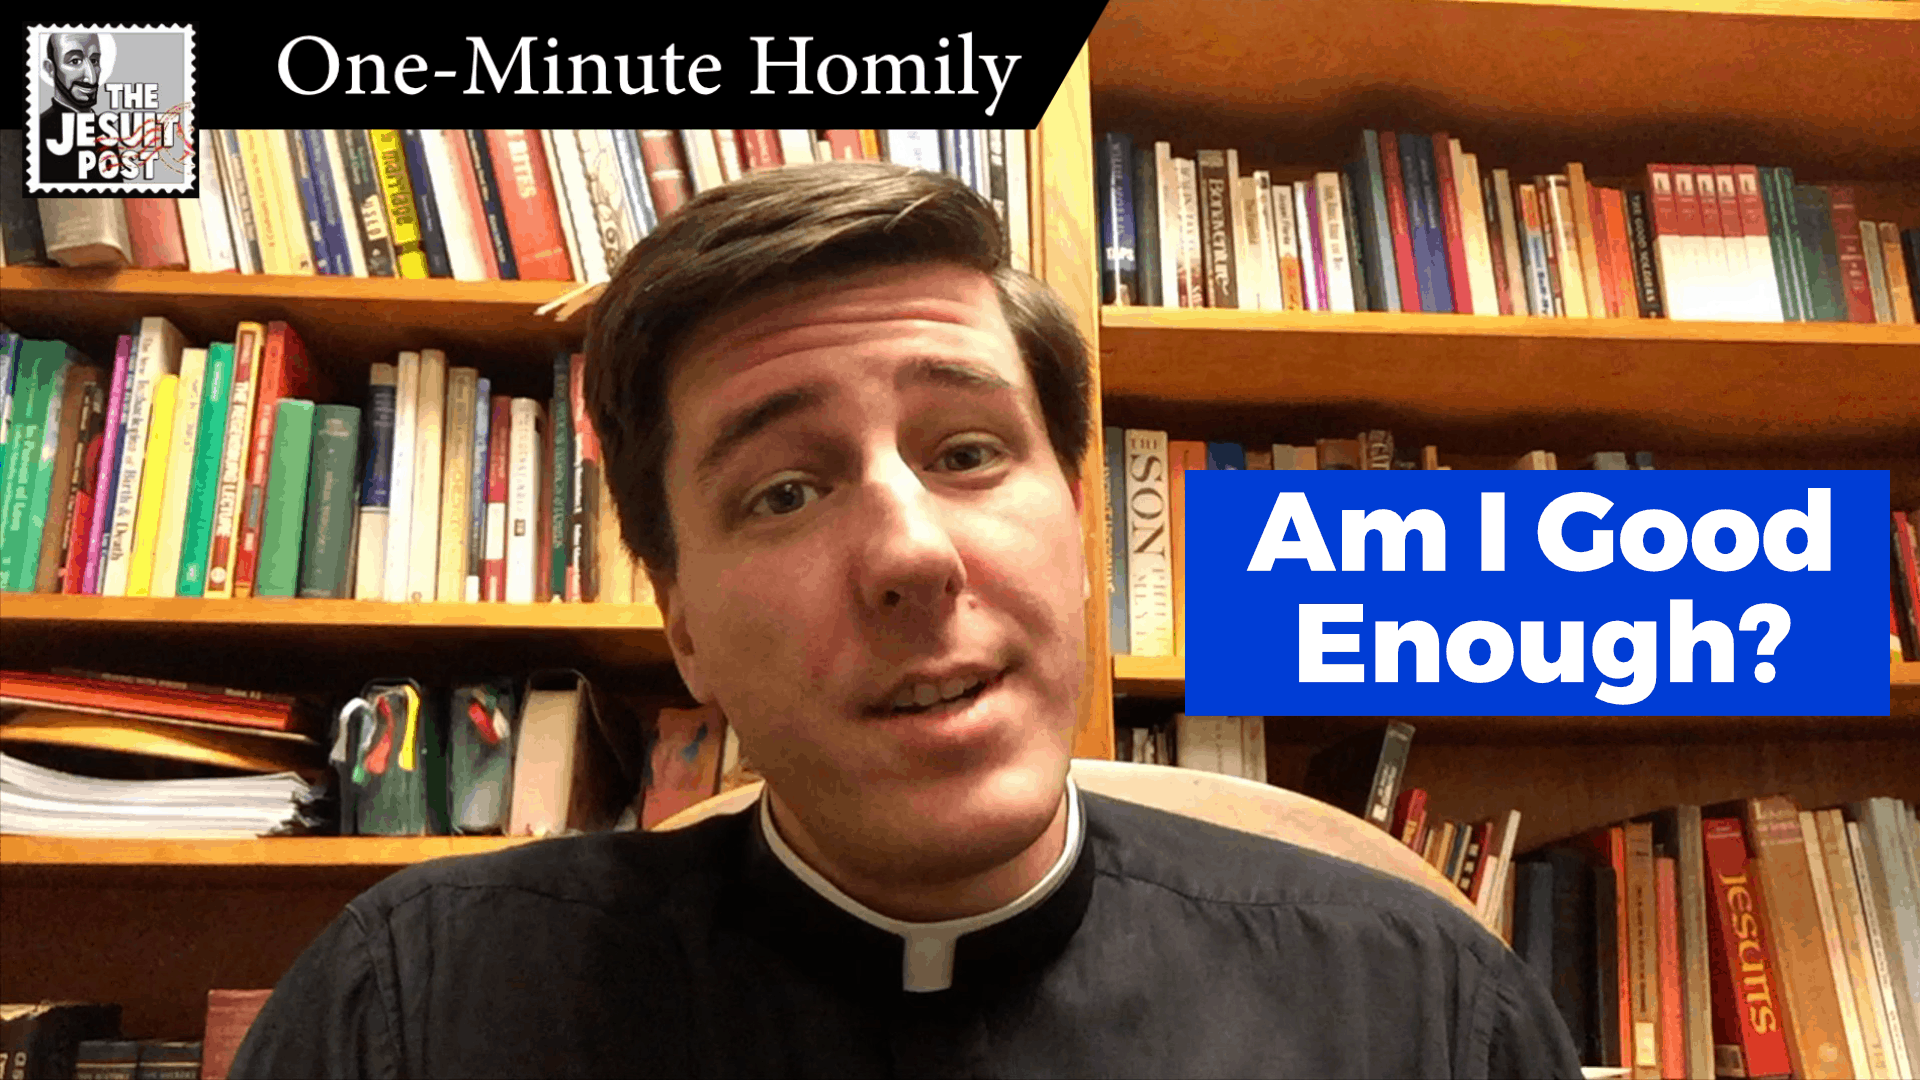 One-Minute Homily: “Am I Good Enough?”